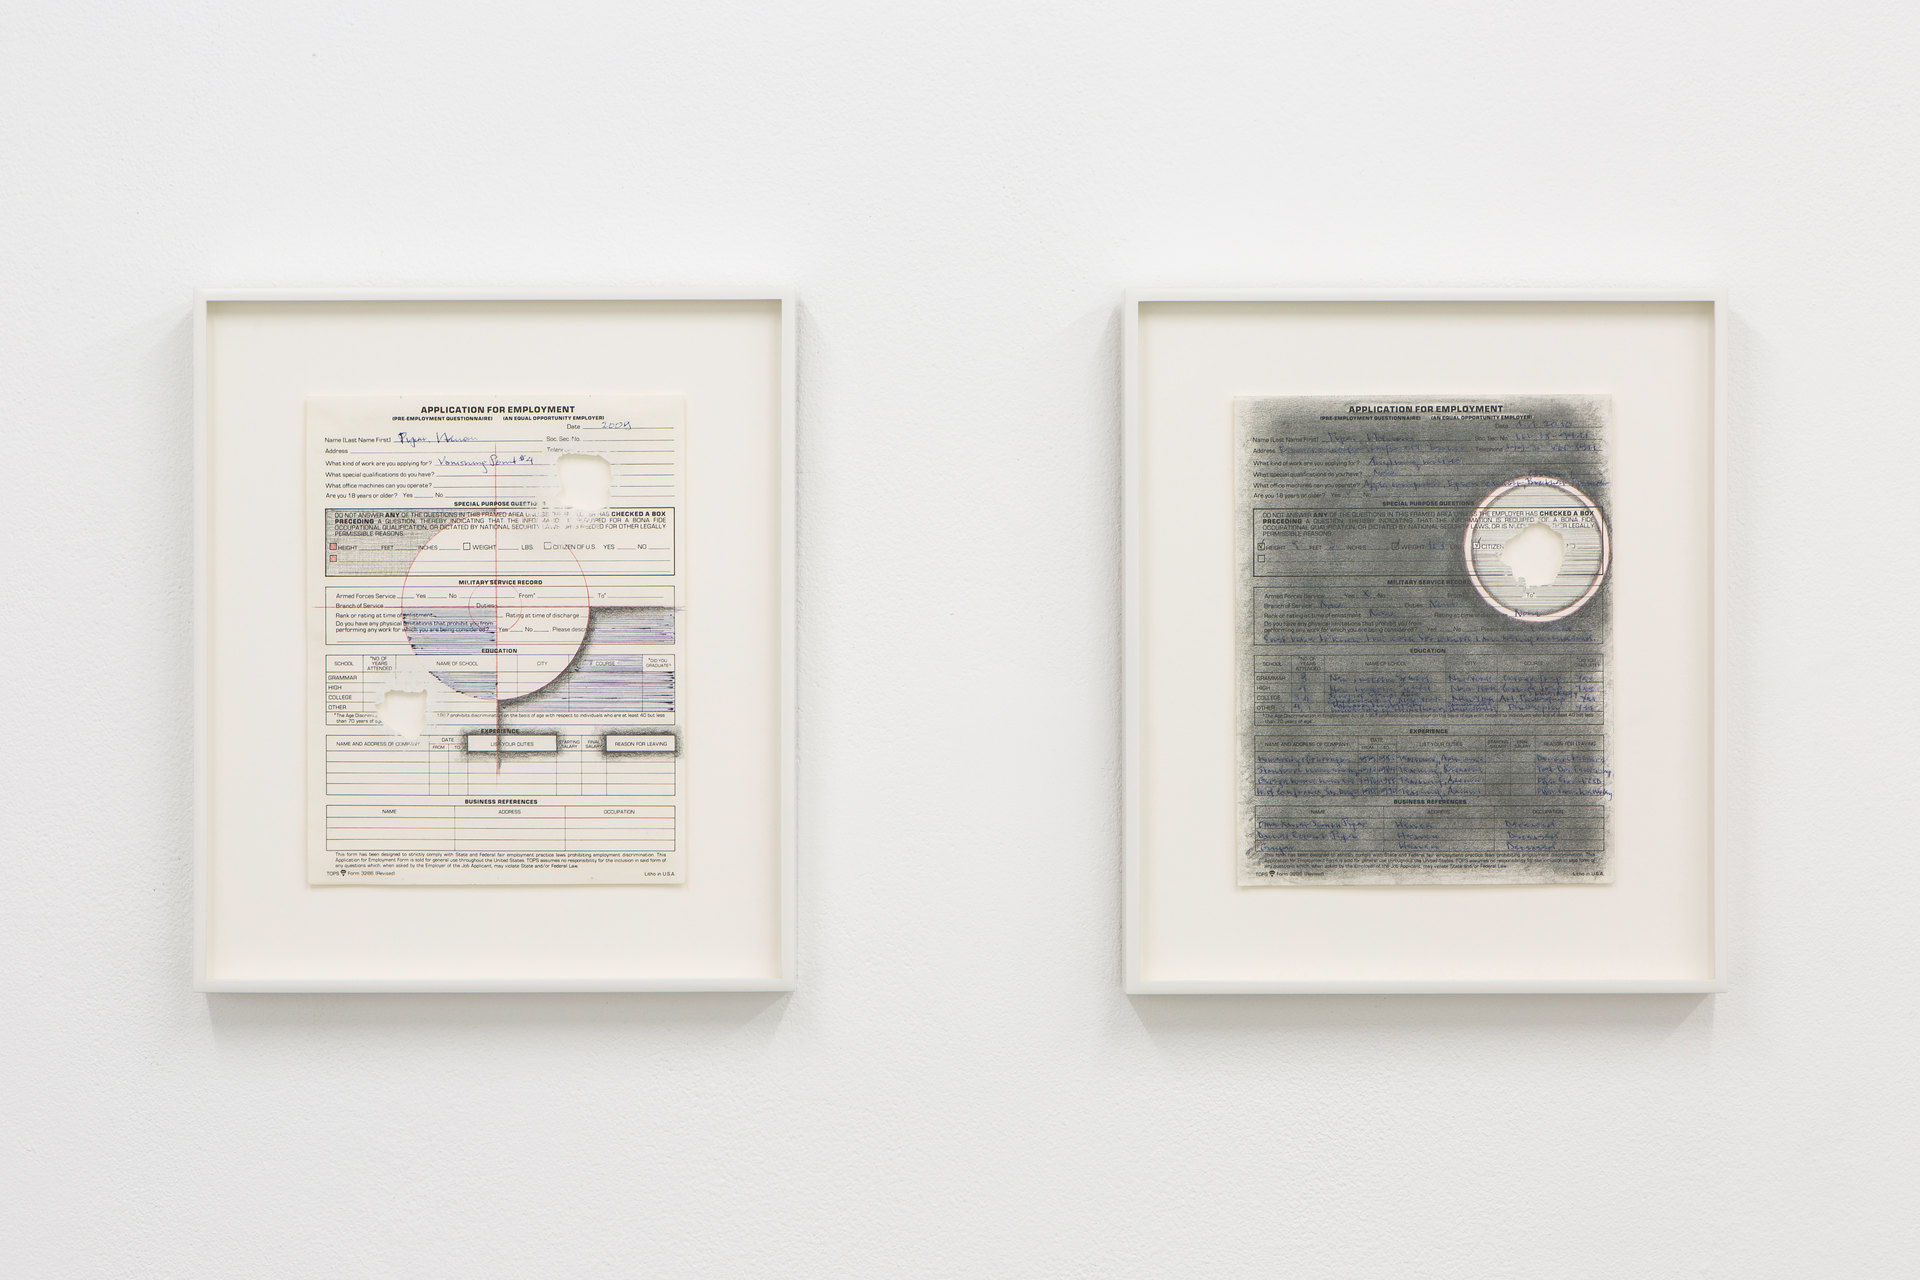 Adrian Piper, 'Vanishing Point #4' and 'Vanishing Point #5', 2009, Civic Duty, 2019, Cell Project Space